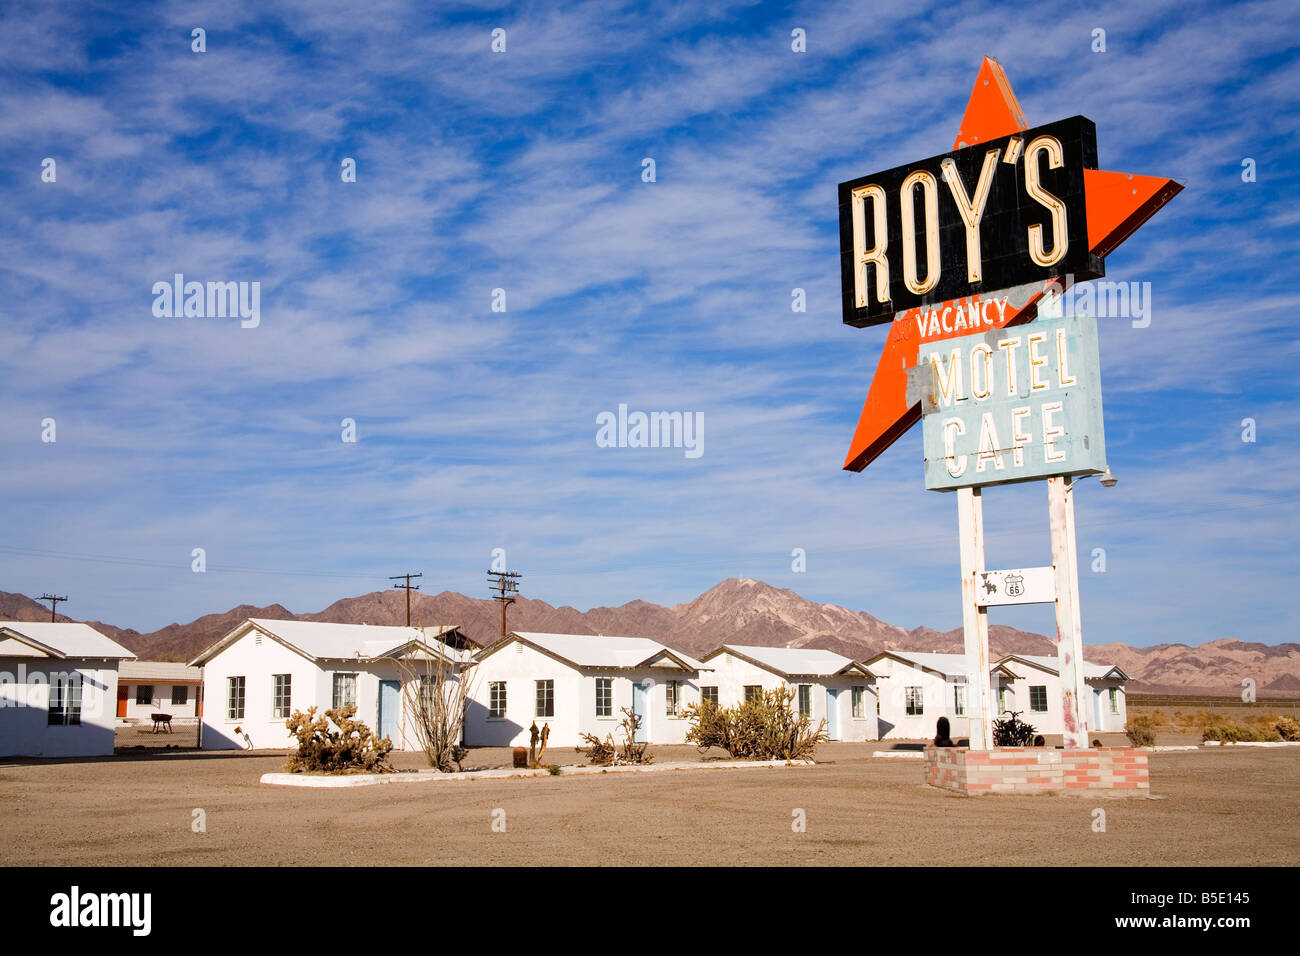 Roy's cafe, motel and garage, Route 66, Amboy, California, USA, North America Stock Photo